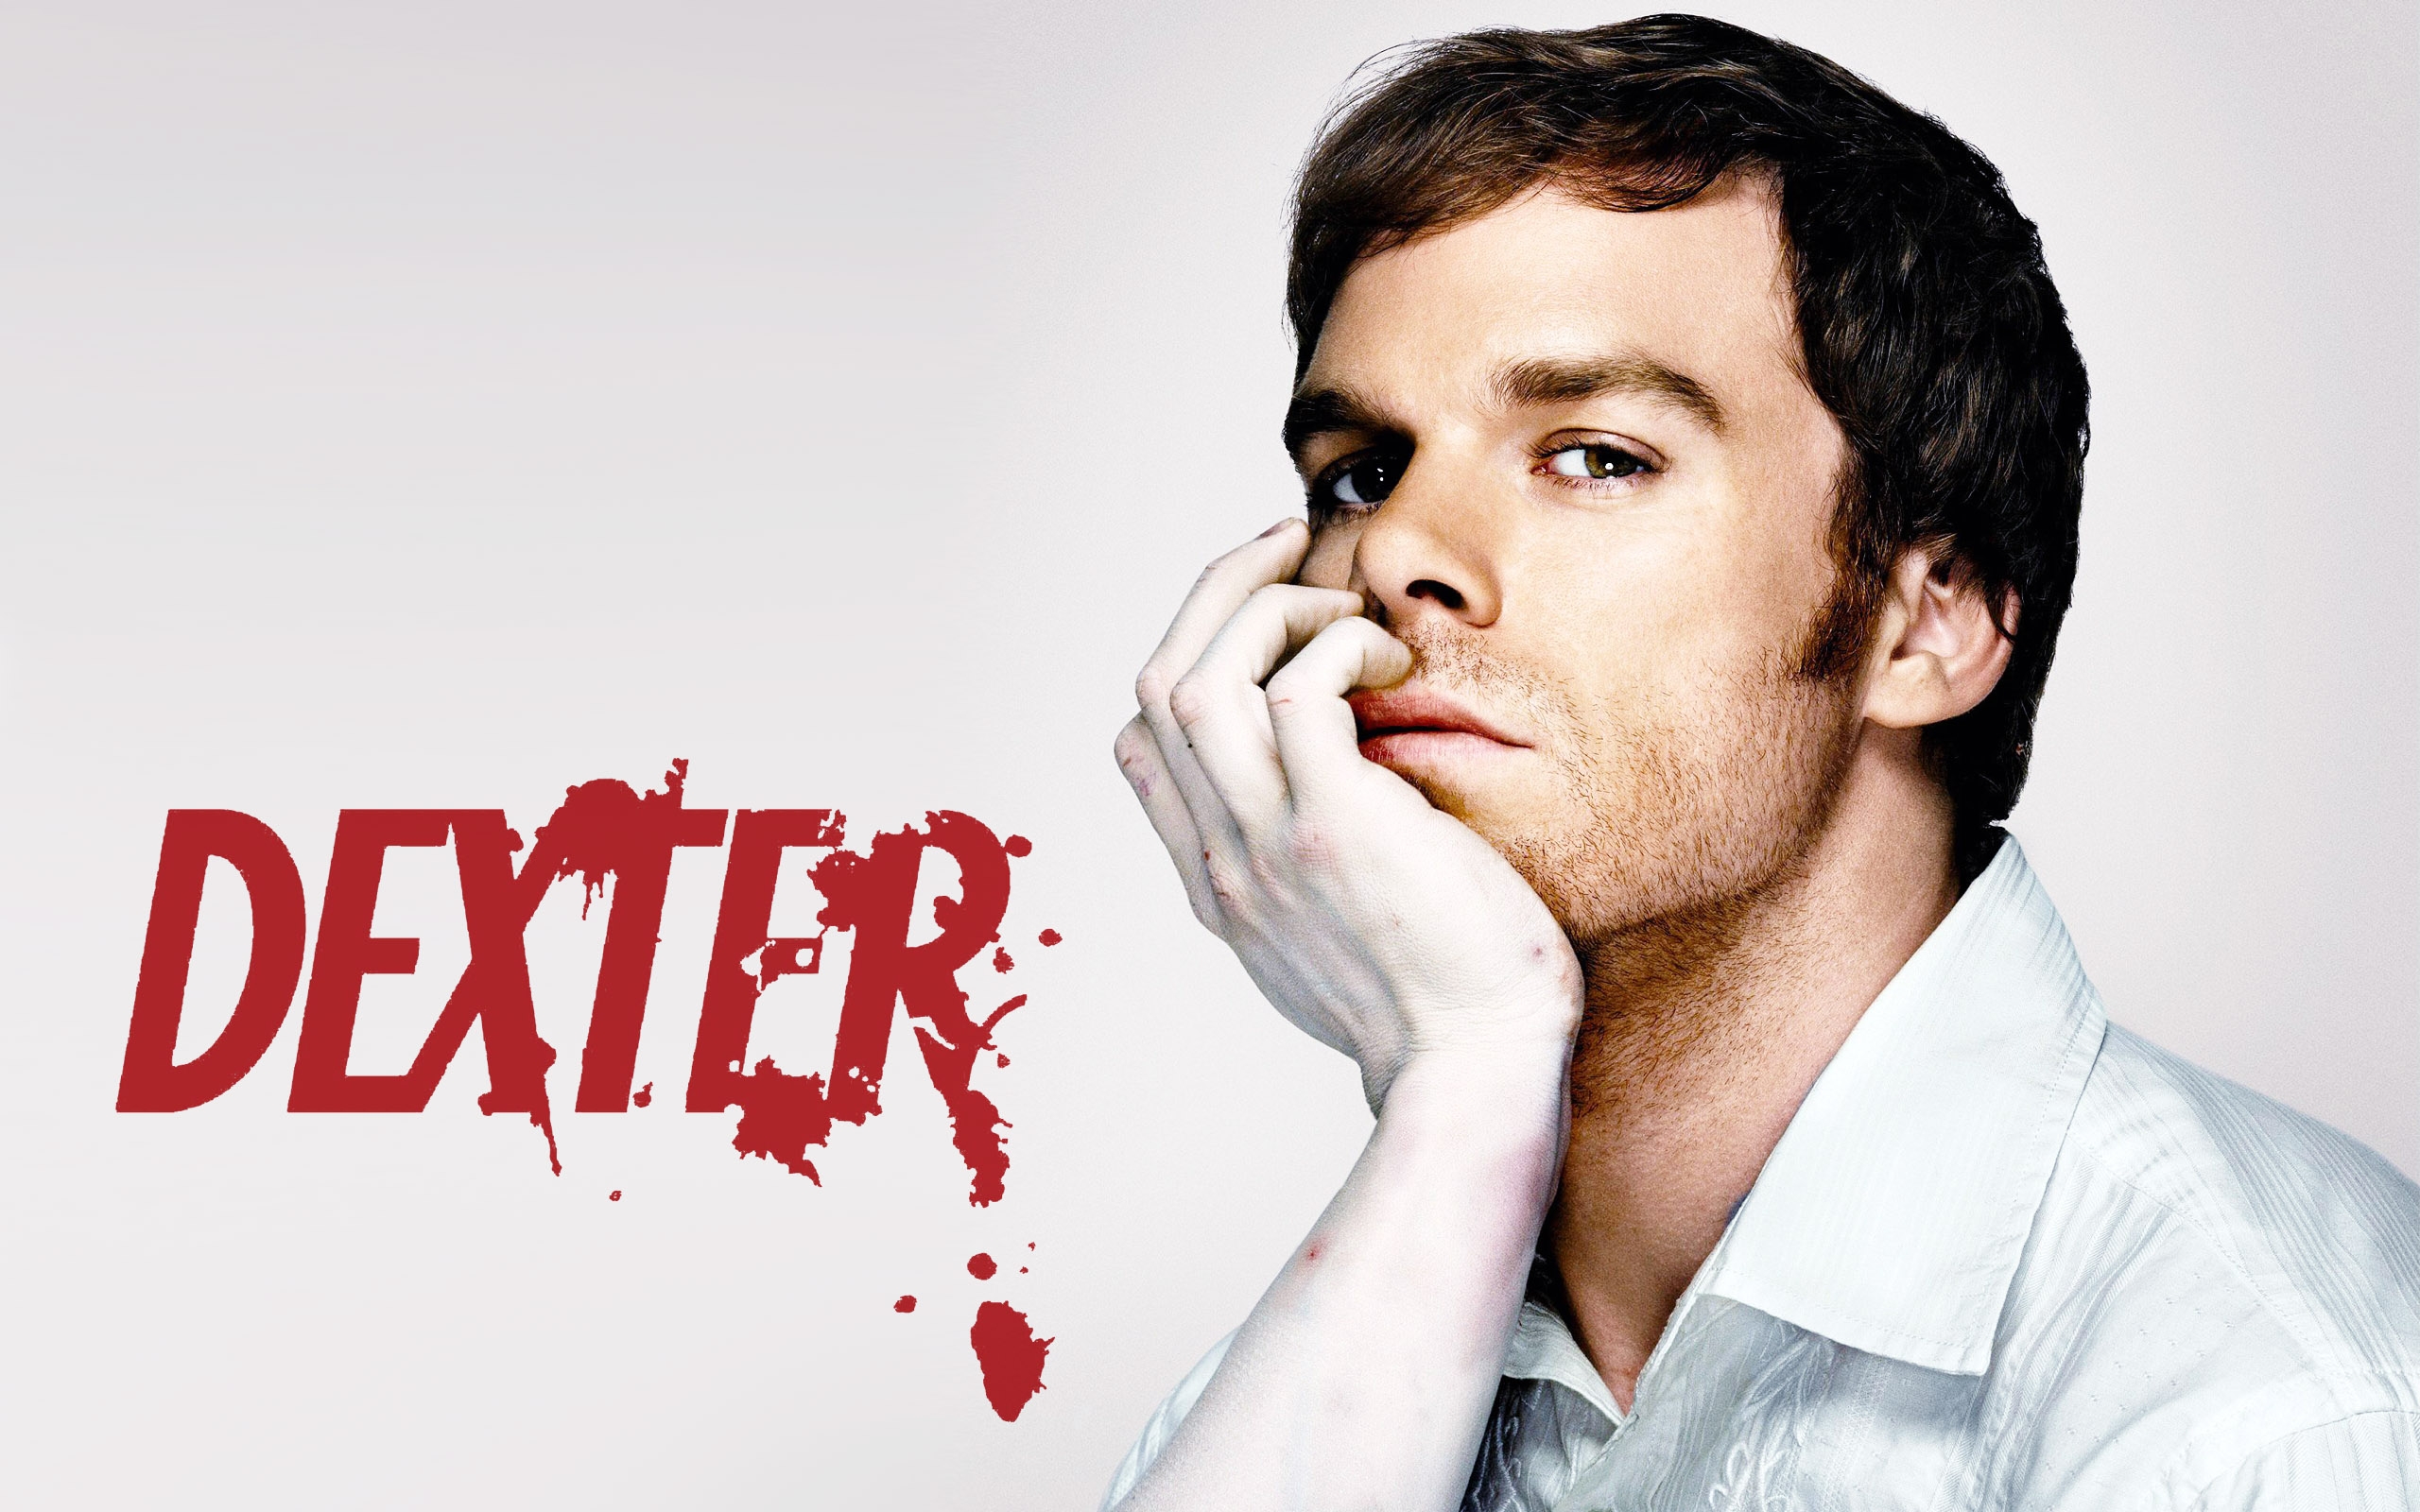 Other Wallpaper Of Dexter You Are Ing